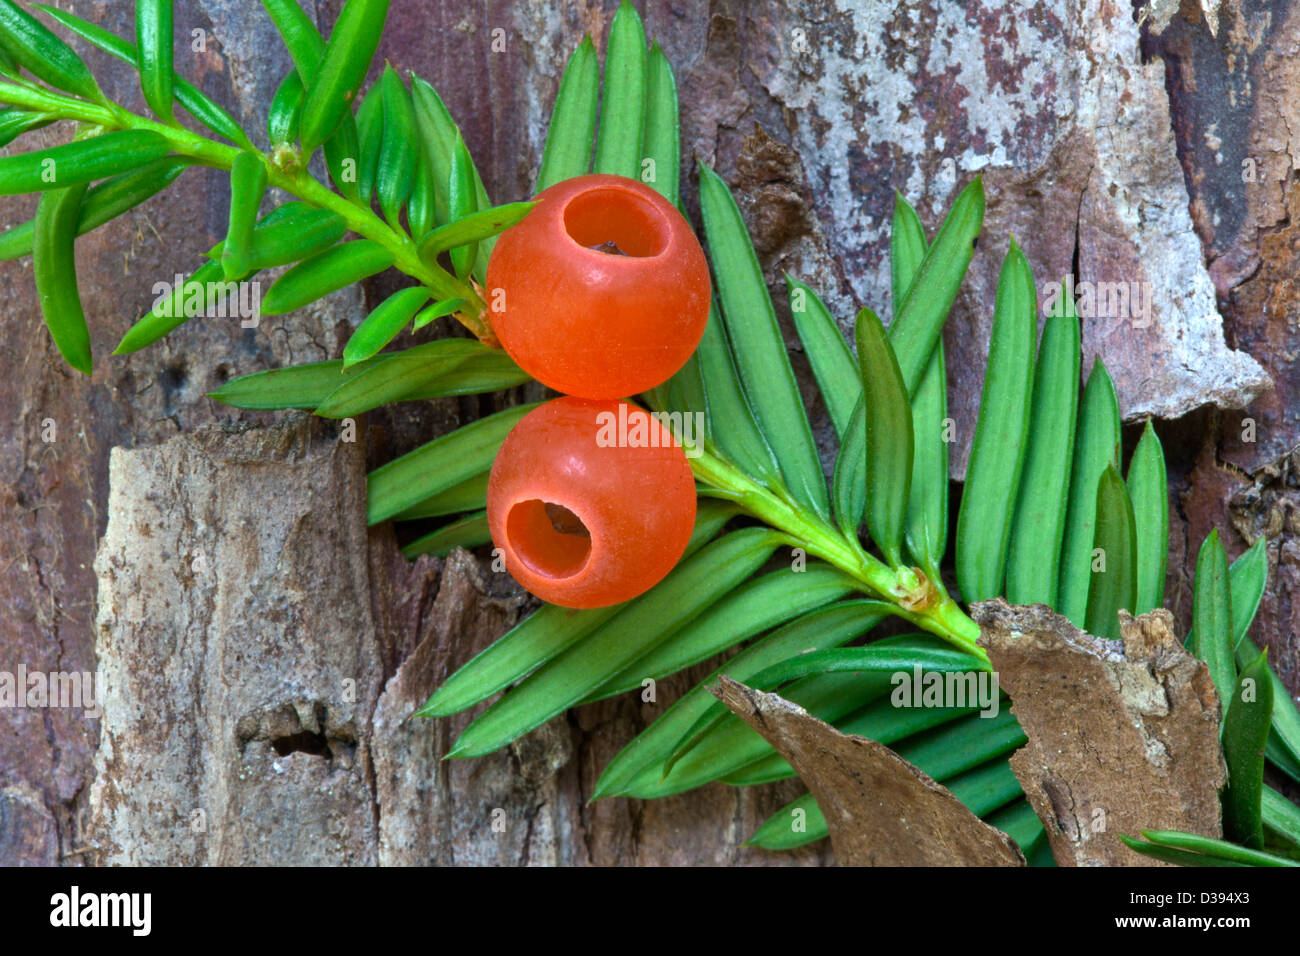 Pacific Yew, Elliptical seeds 1/4' long, enclosed in scarlet cups. Stock Photo